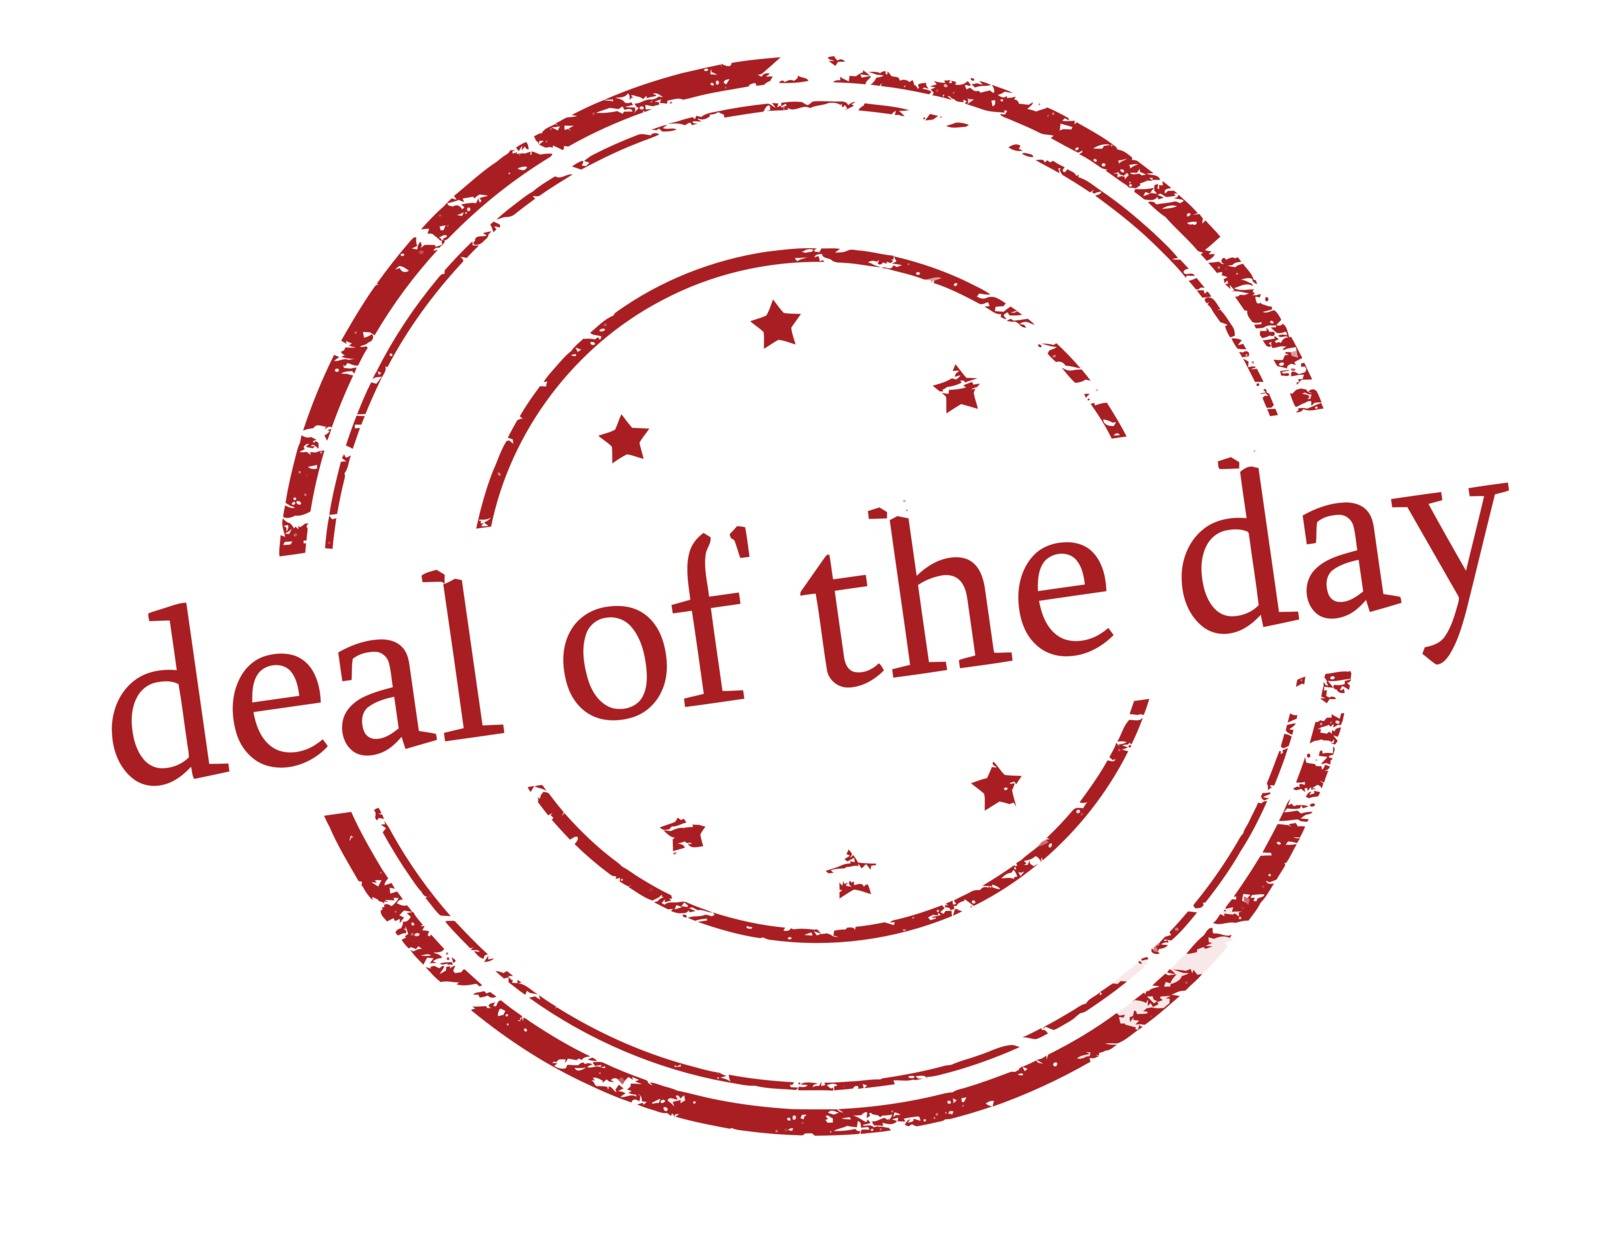 Deal of the day by carmenbobo